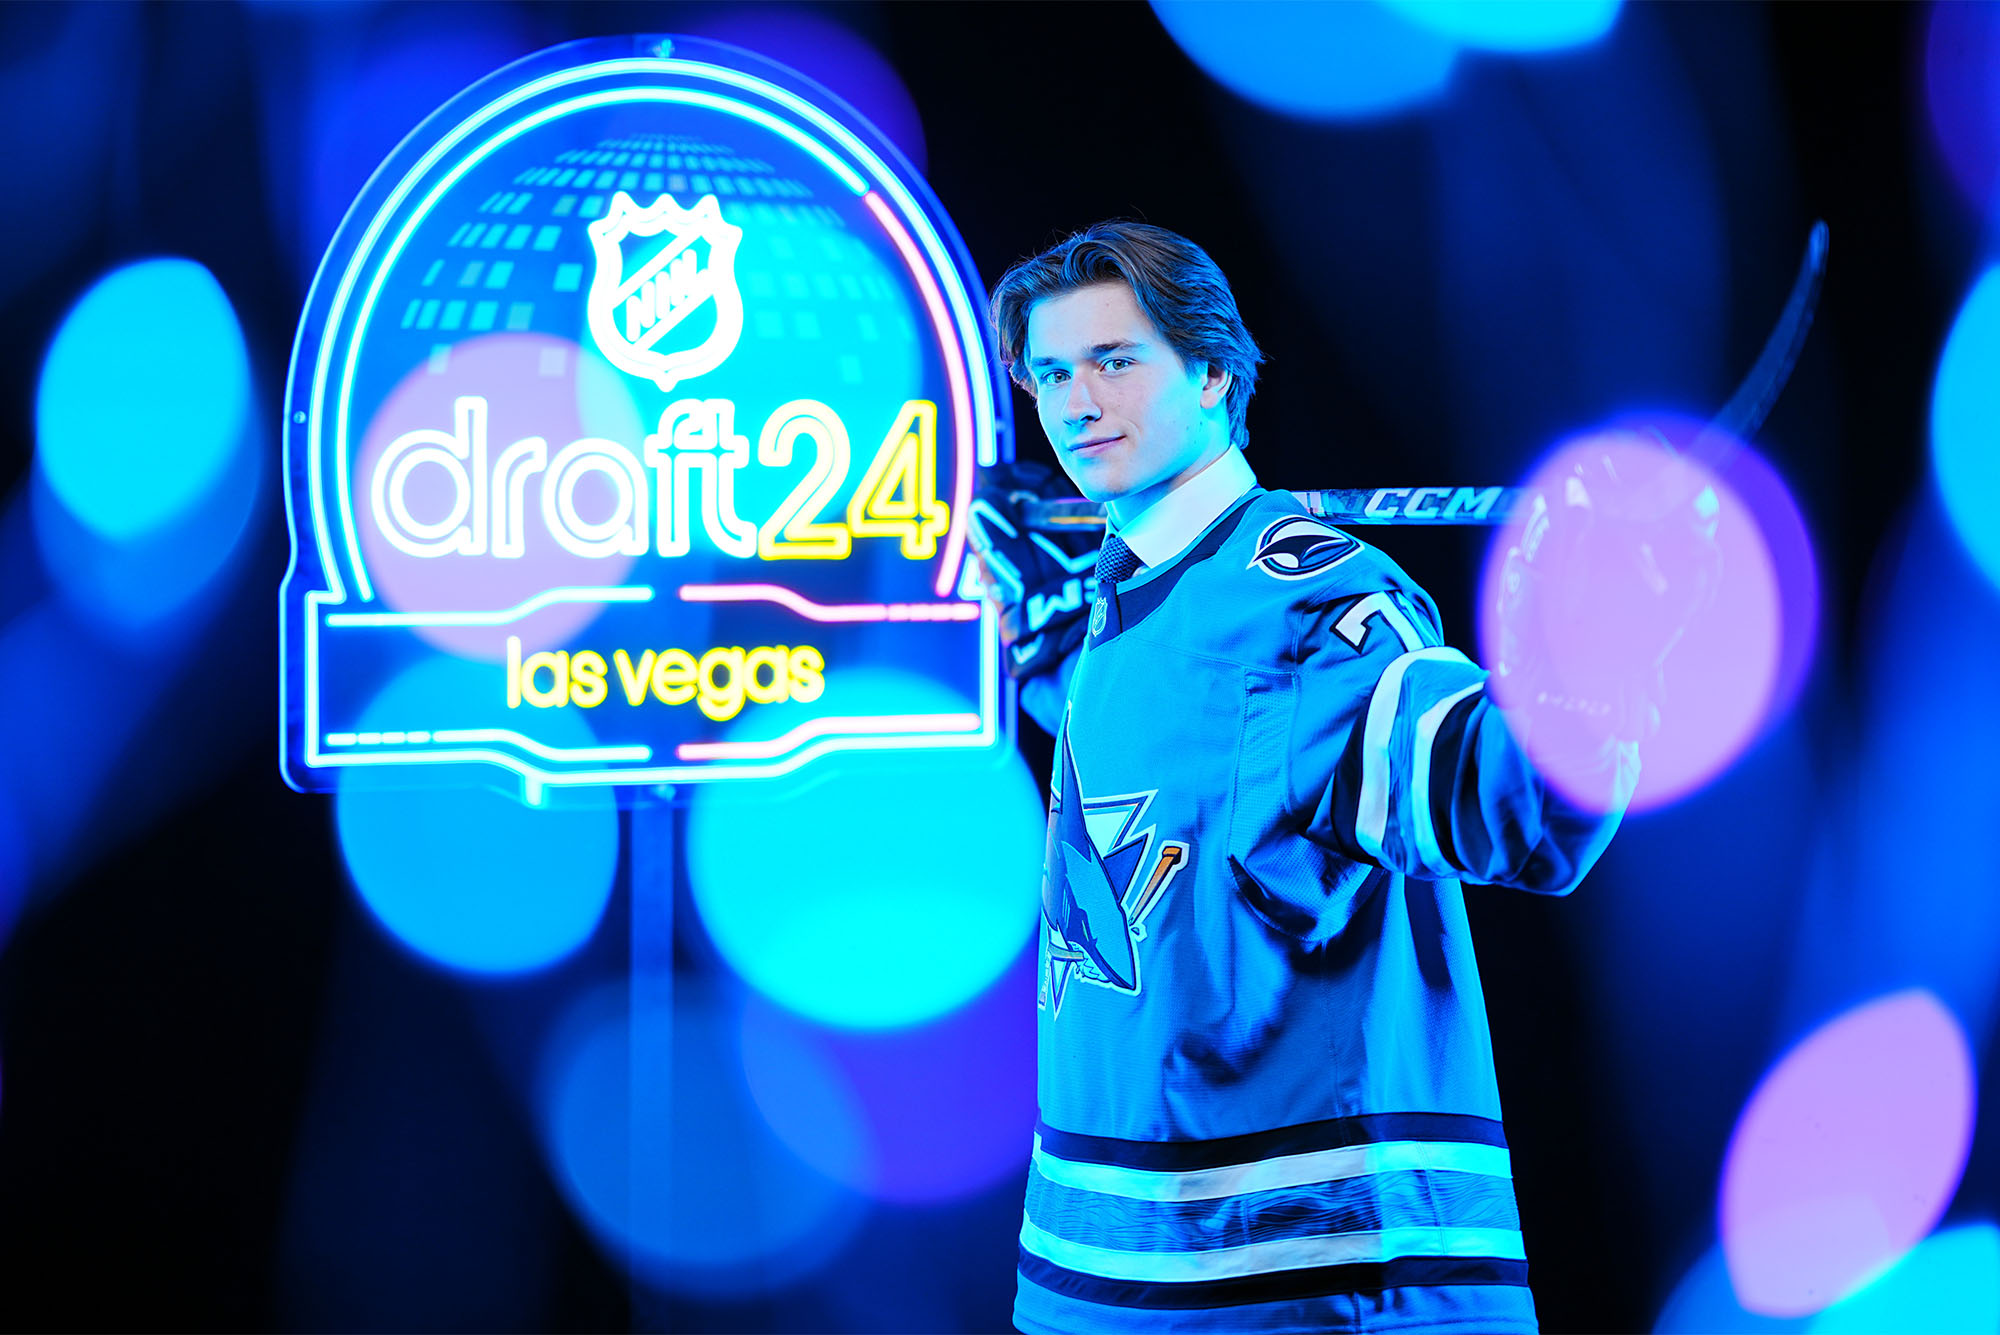 Macklin Celebrini (CAS’27) poses for a portrait after being selected first overall by the San Jose Sharks during the 2024 Upper Deck NHL Draft on June 28 at Sphere in Las Vegas, Nev. Photo by Mark Blinch/NHLI via Getty Images